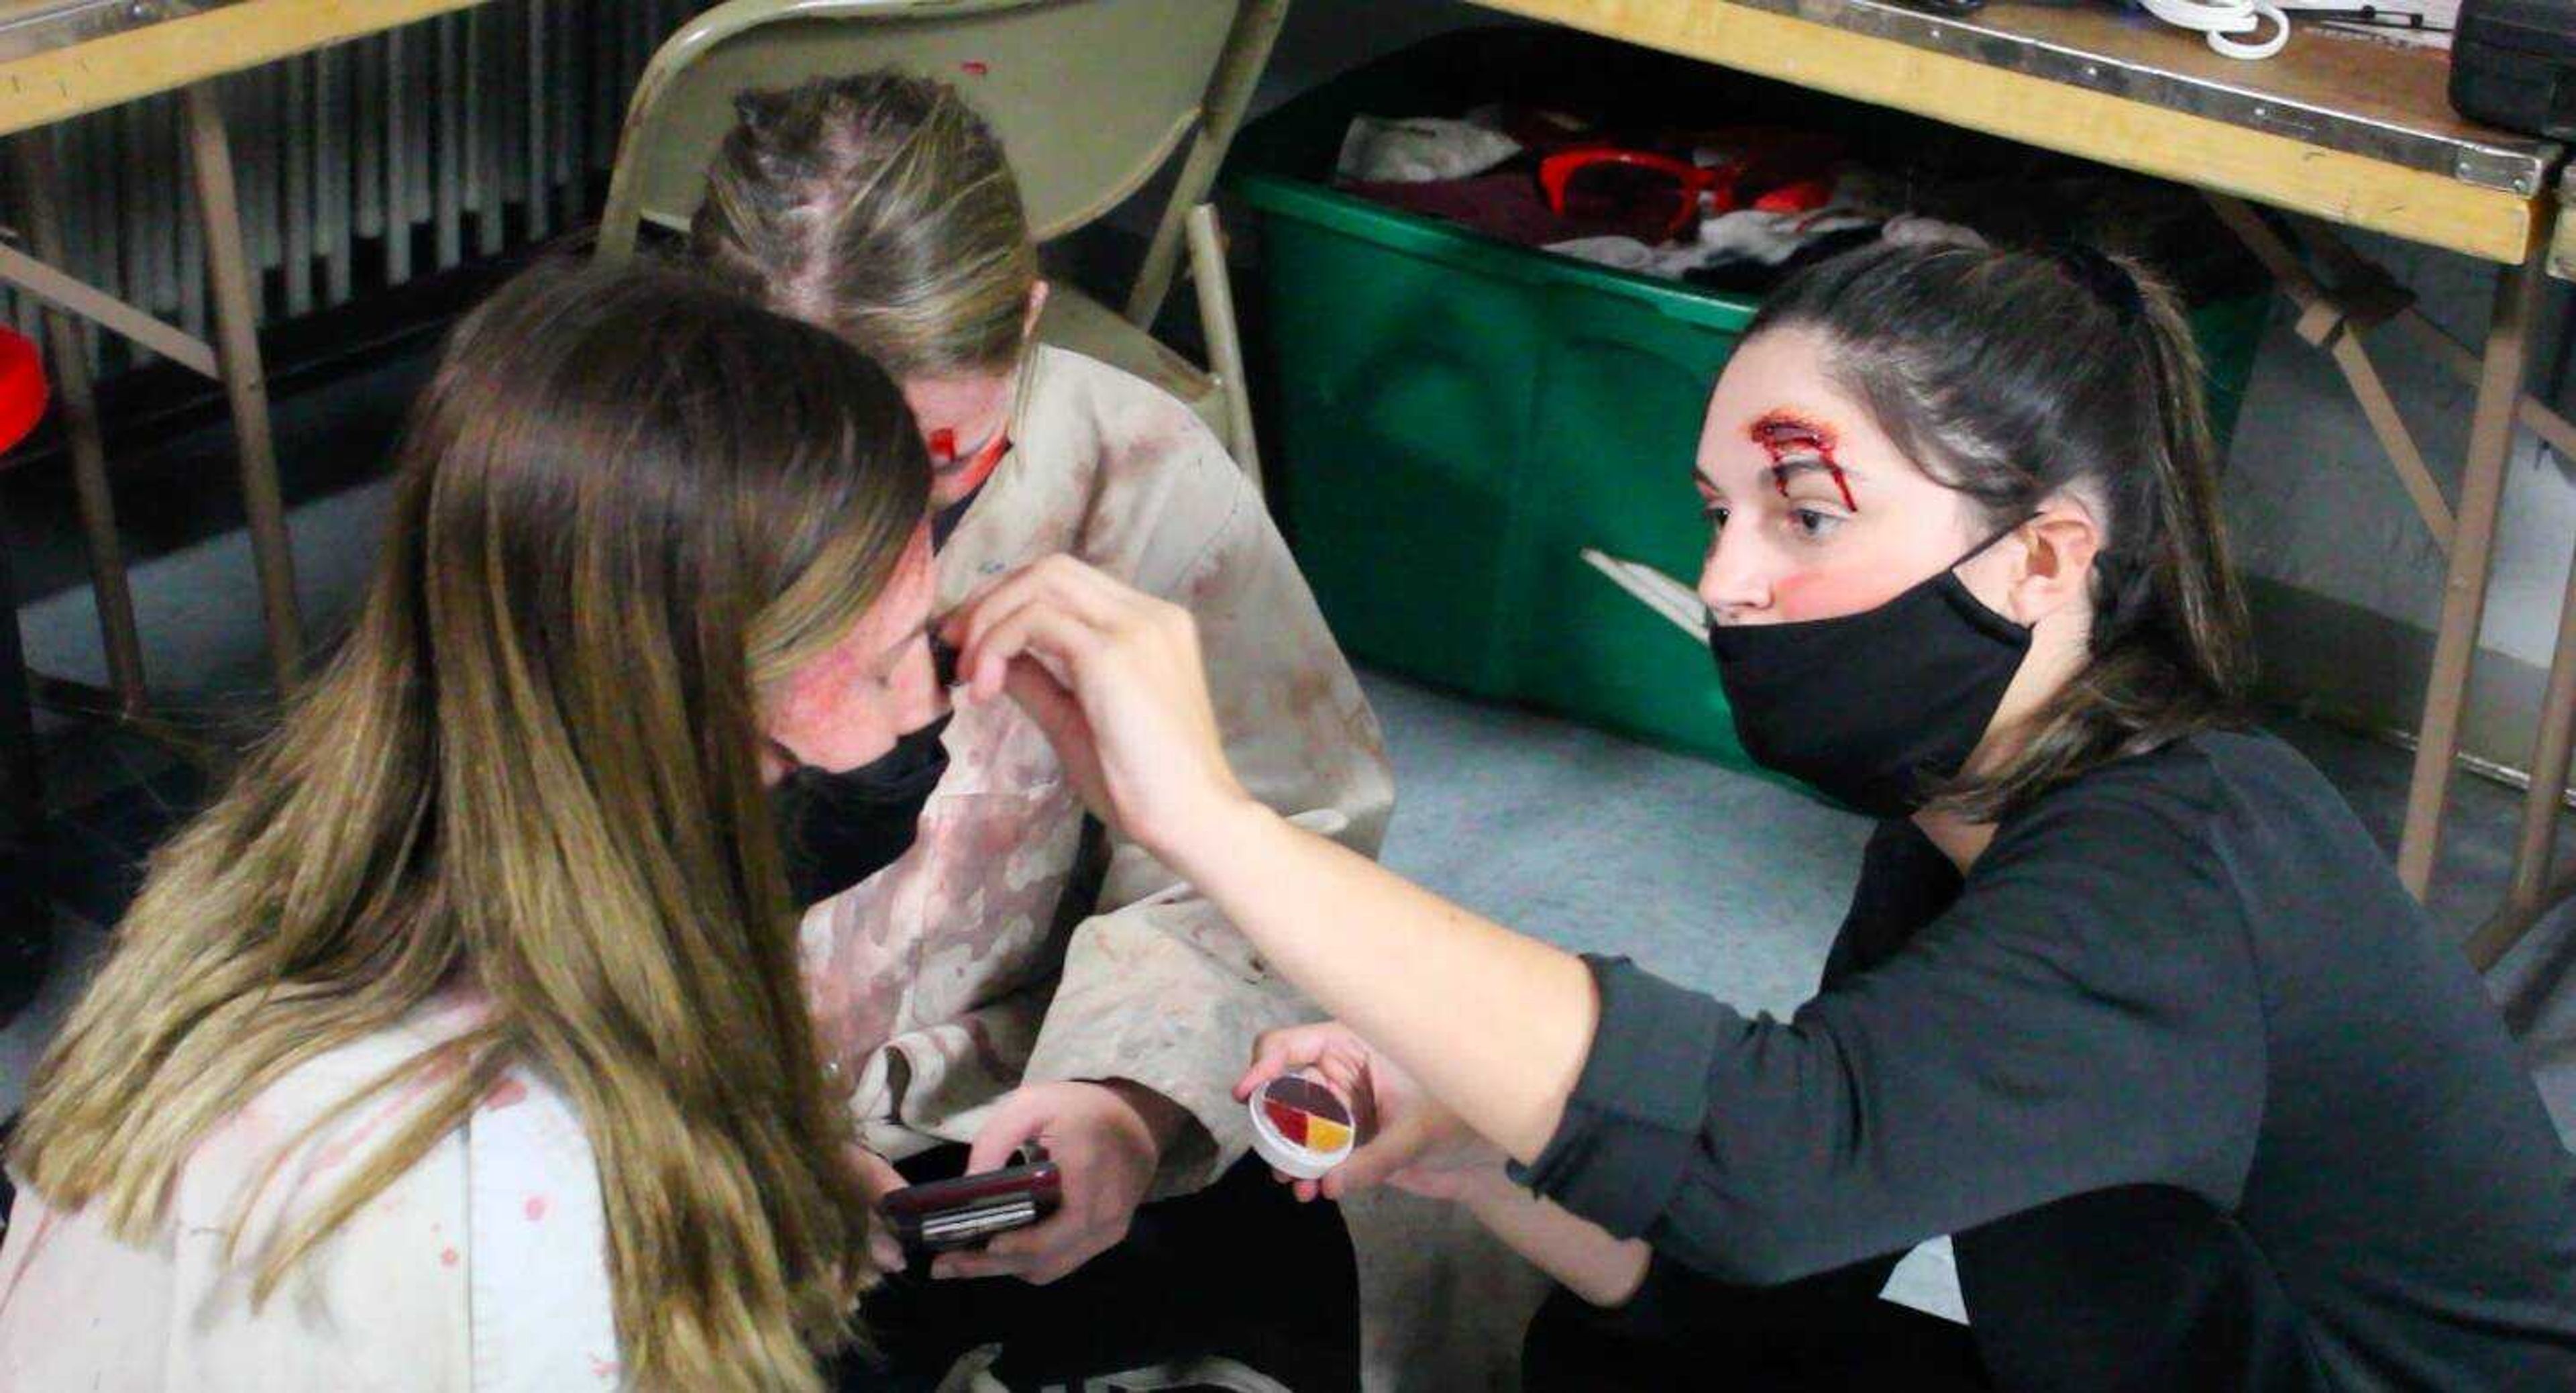 Southeast junior Caitlin Helterbrand helps other volunteers put on makeup for the 29th annual Haunted Hall of Horror at the A.C. Brase Arena on Thursday, Oct. 22, 2020, in Arena Park.